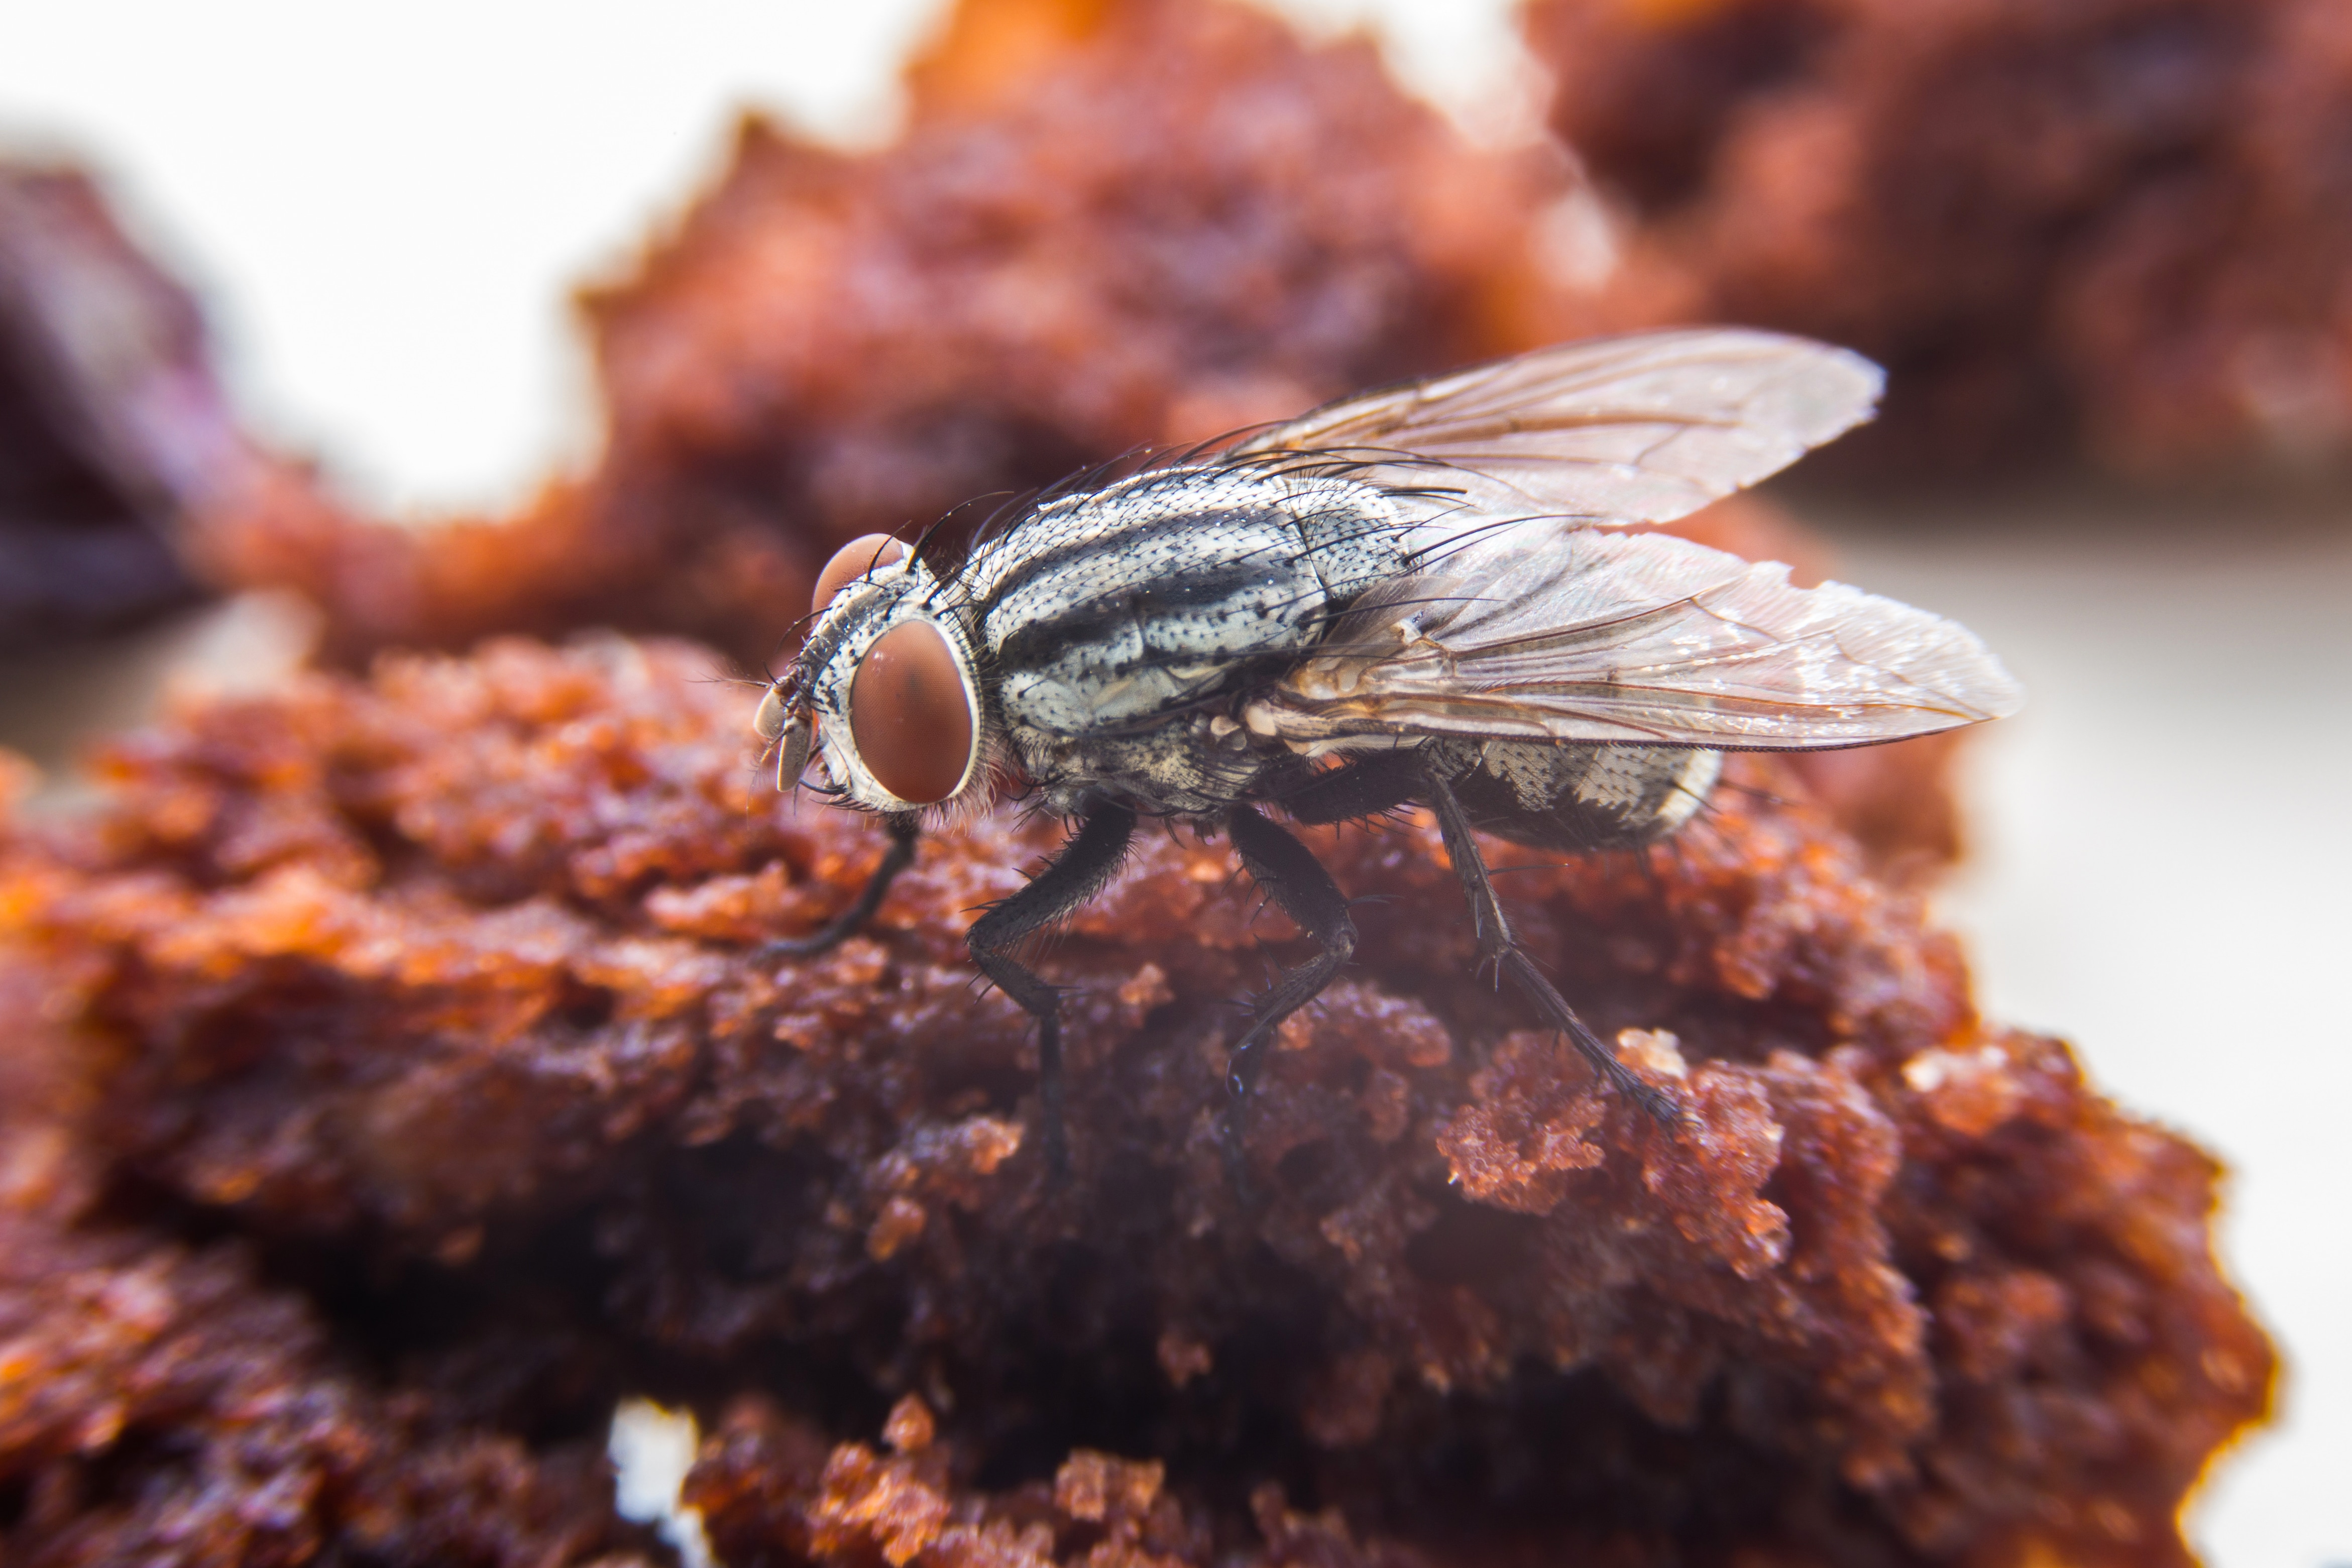 Large fly sitting on piece of fried food.